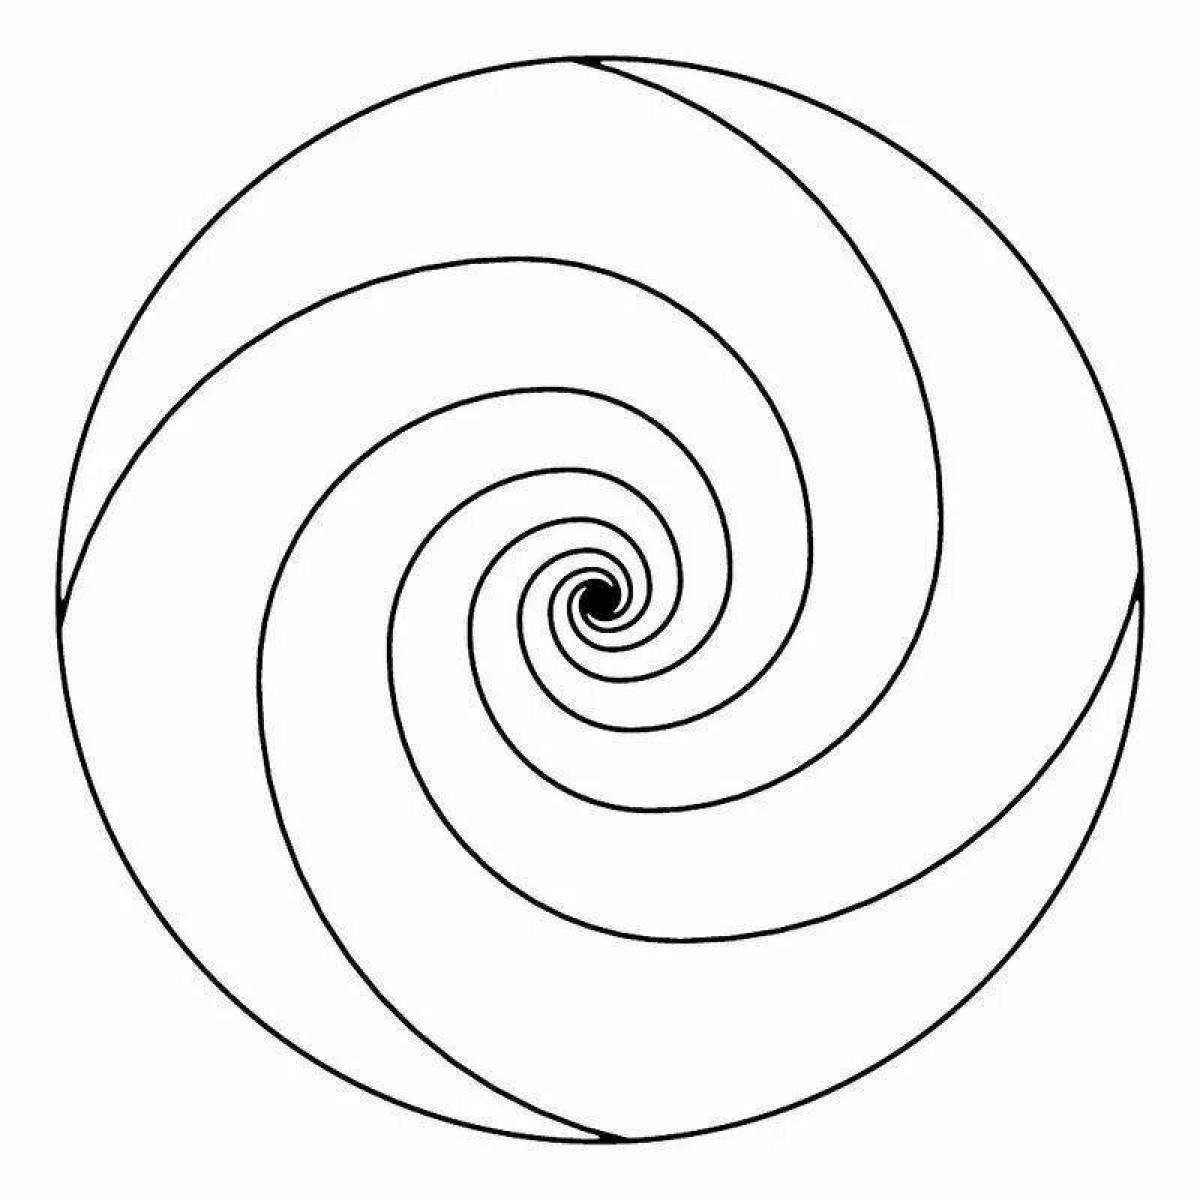 A fascinating spiral to create a coloring page